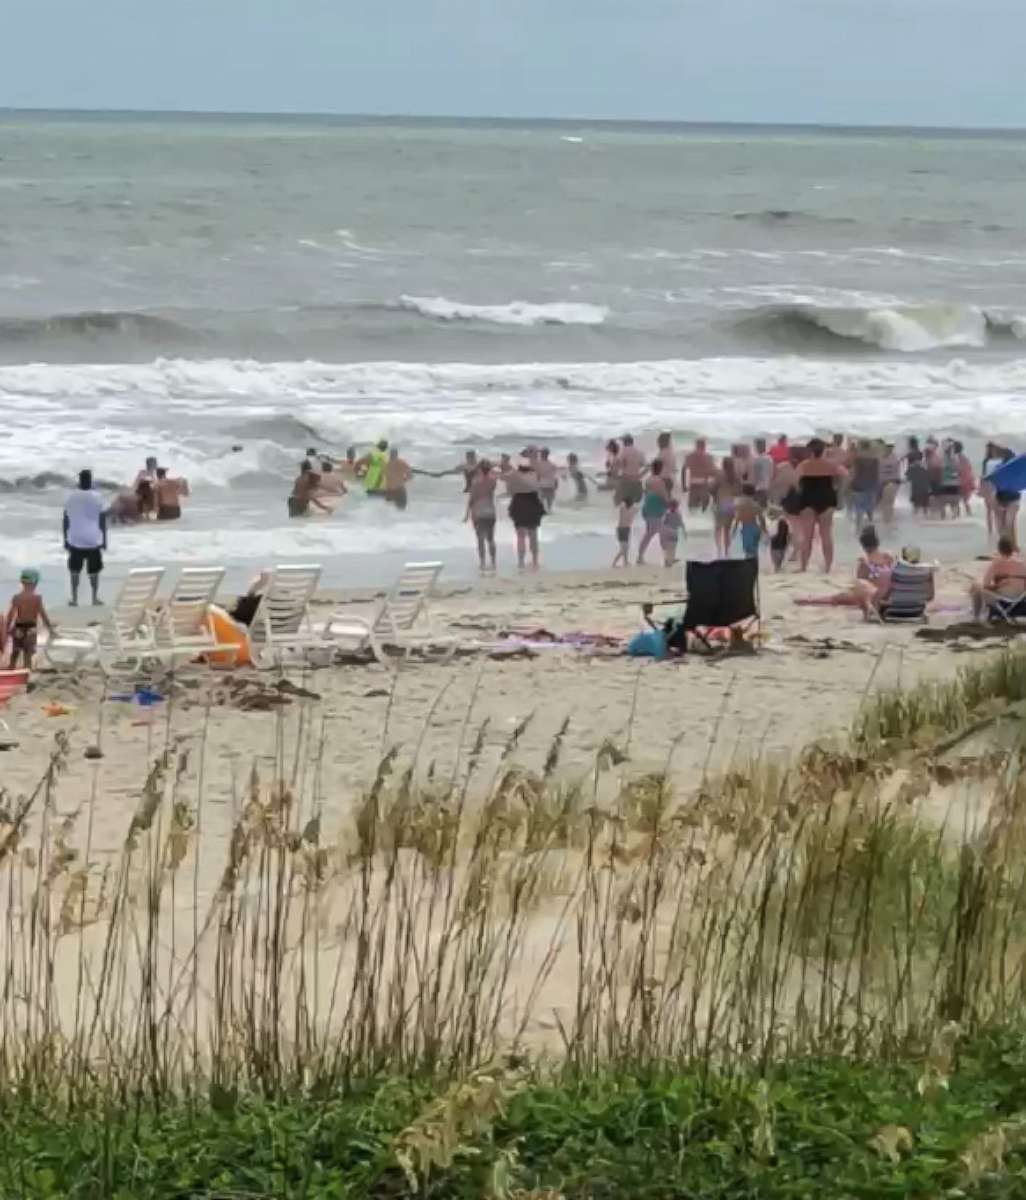 PHOTO: Beach-goers in Emerald Isle, North Carolina, formed a human chain to help get swimmers out of the rough surf.